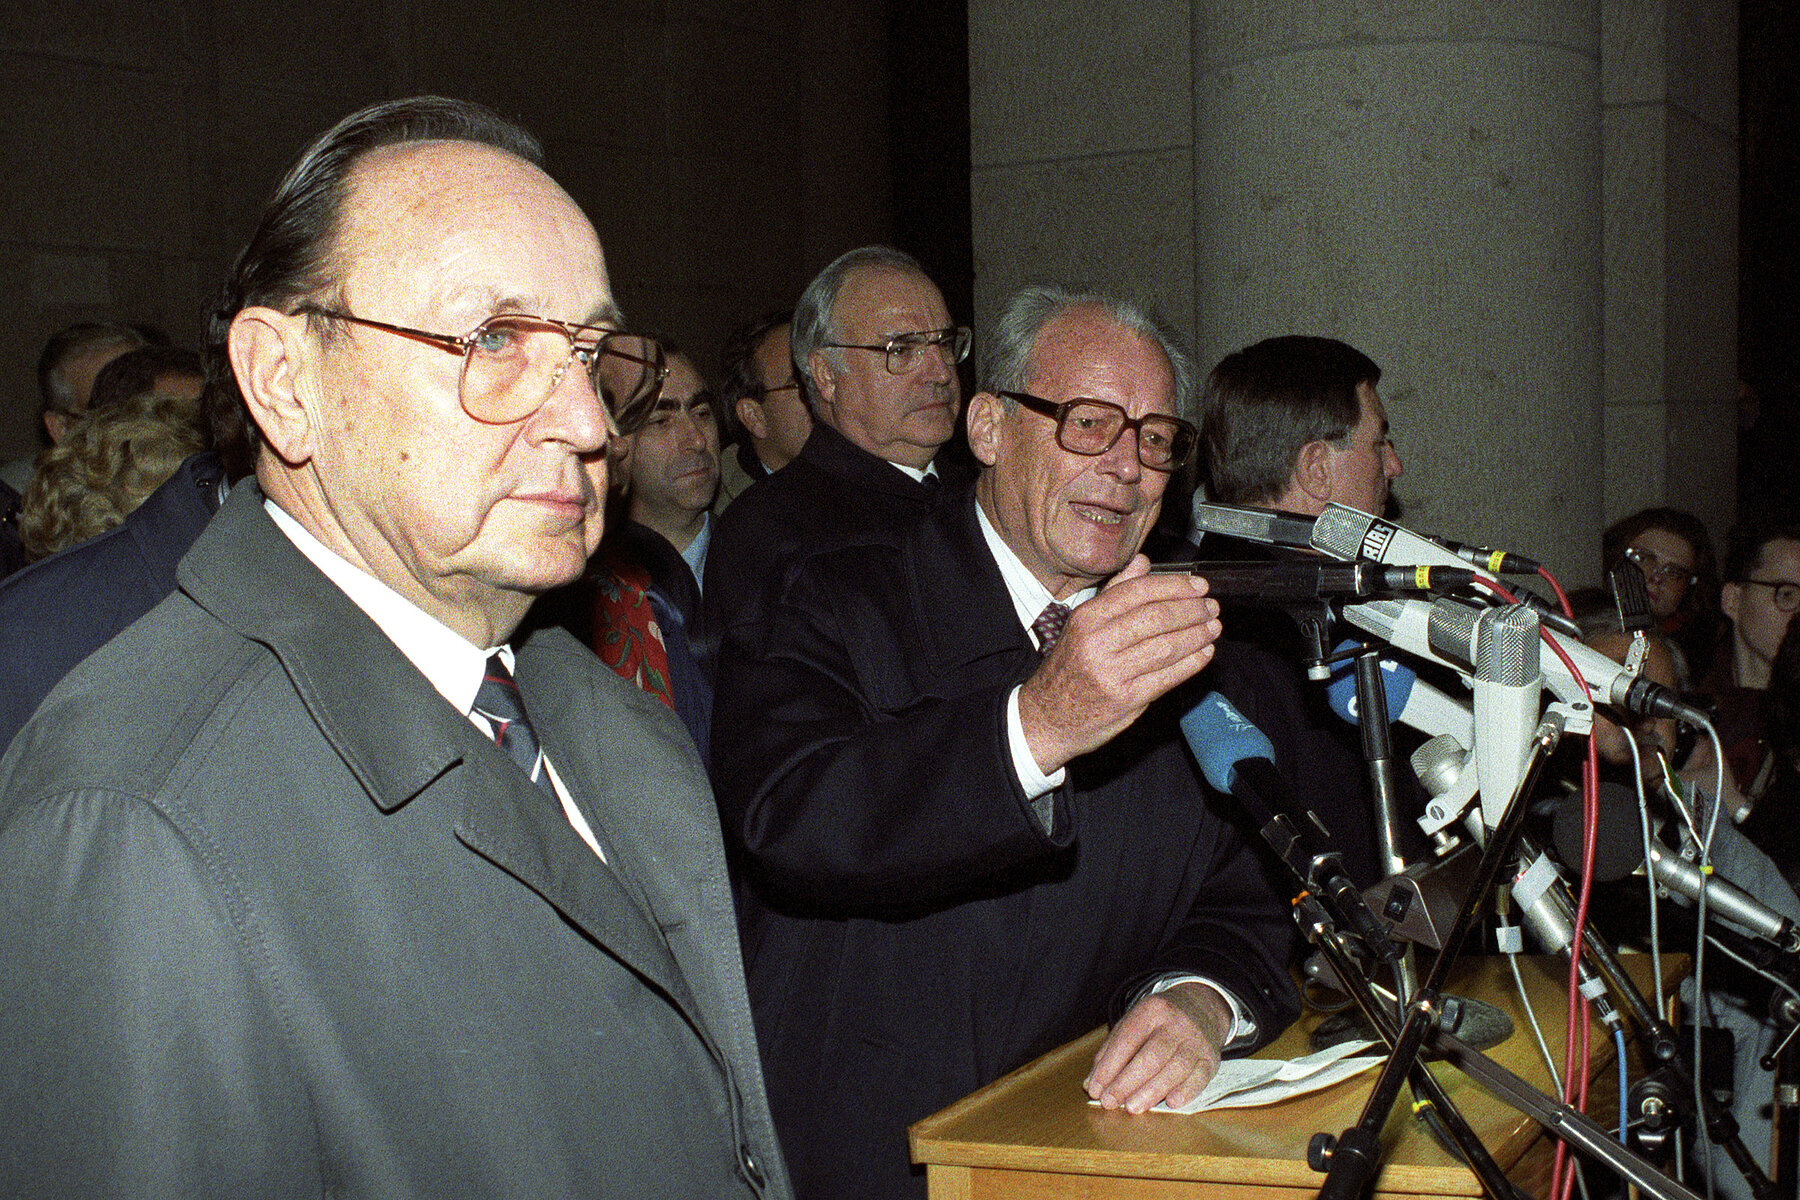 In the front is Hans-Dietrich Genscher, behind him to the right is Helmut Kohl with other politicians. Next to him on the right Willy Brandt speaks into a microphone on a lectern. 